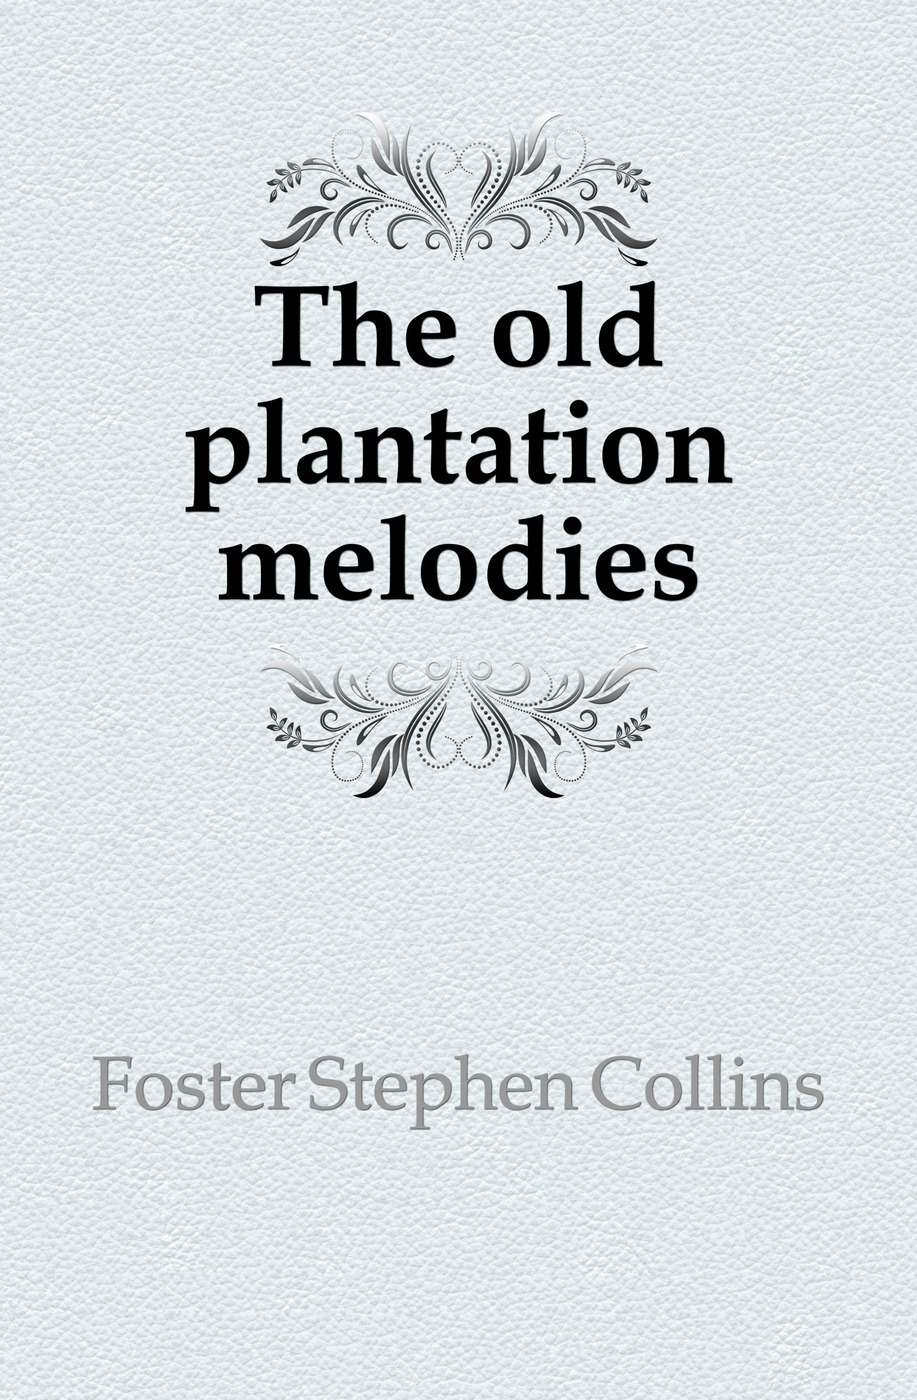 The old plantation melodies